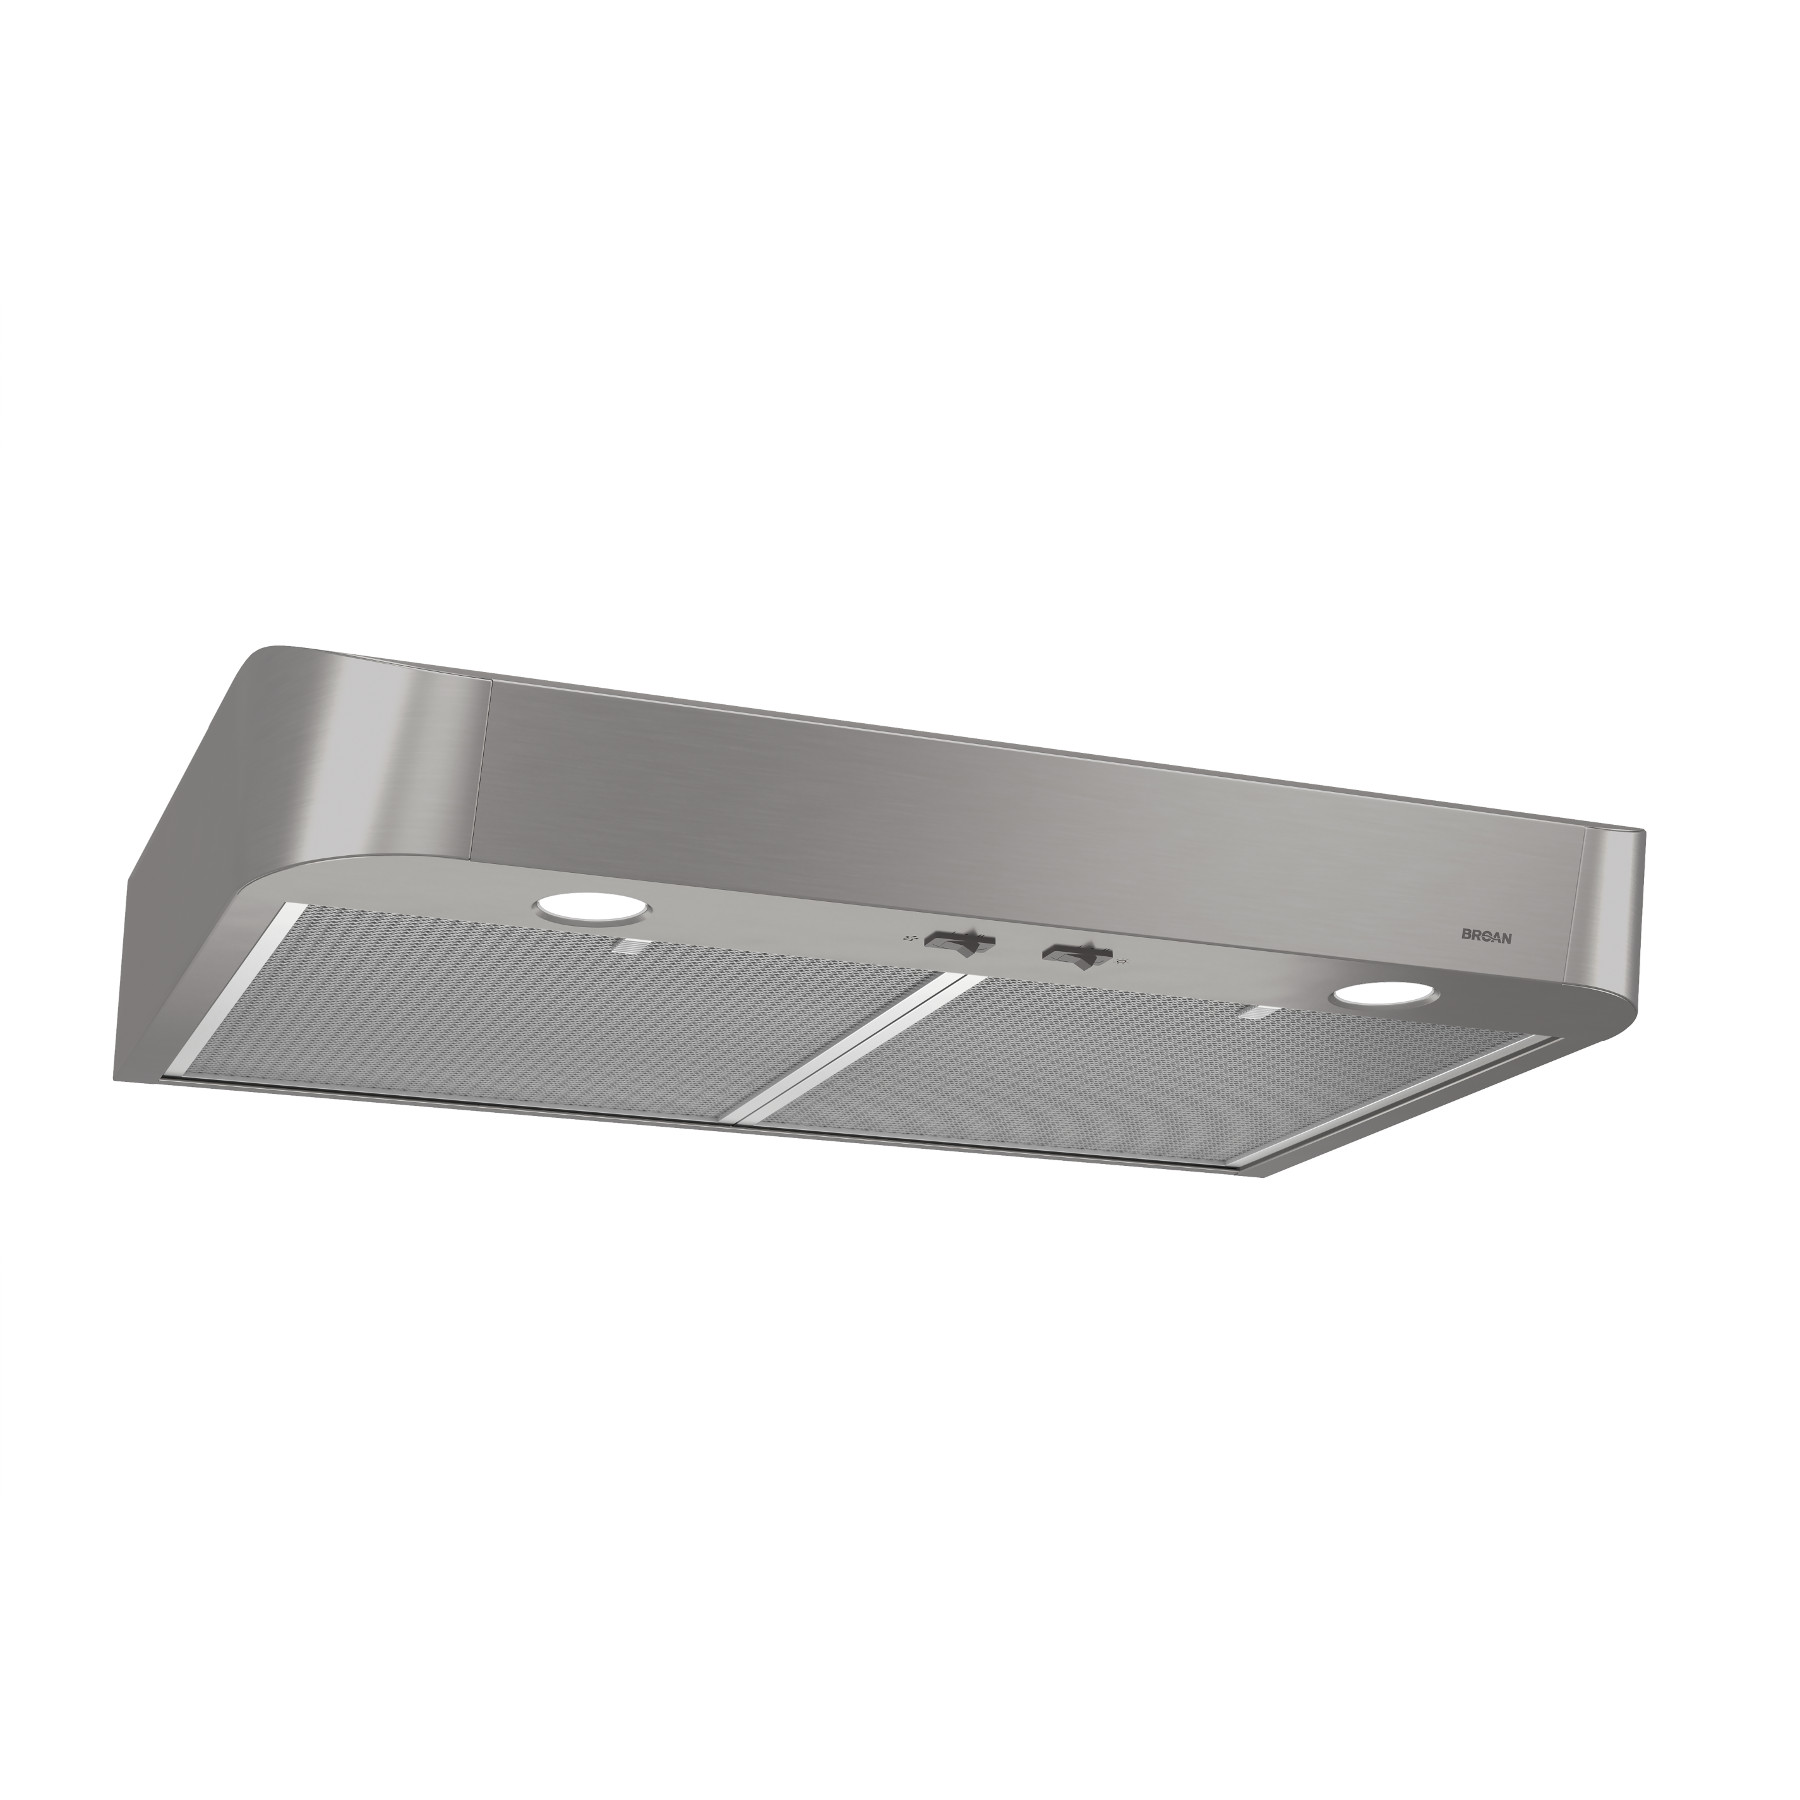 **DISCONTINUED** Broan® 30-Inch Convertible Under-Cabinet Range Hood, Stainless Steel